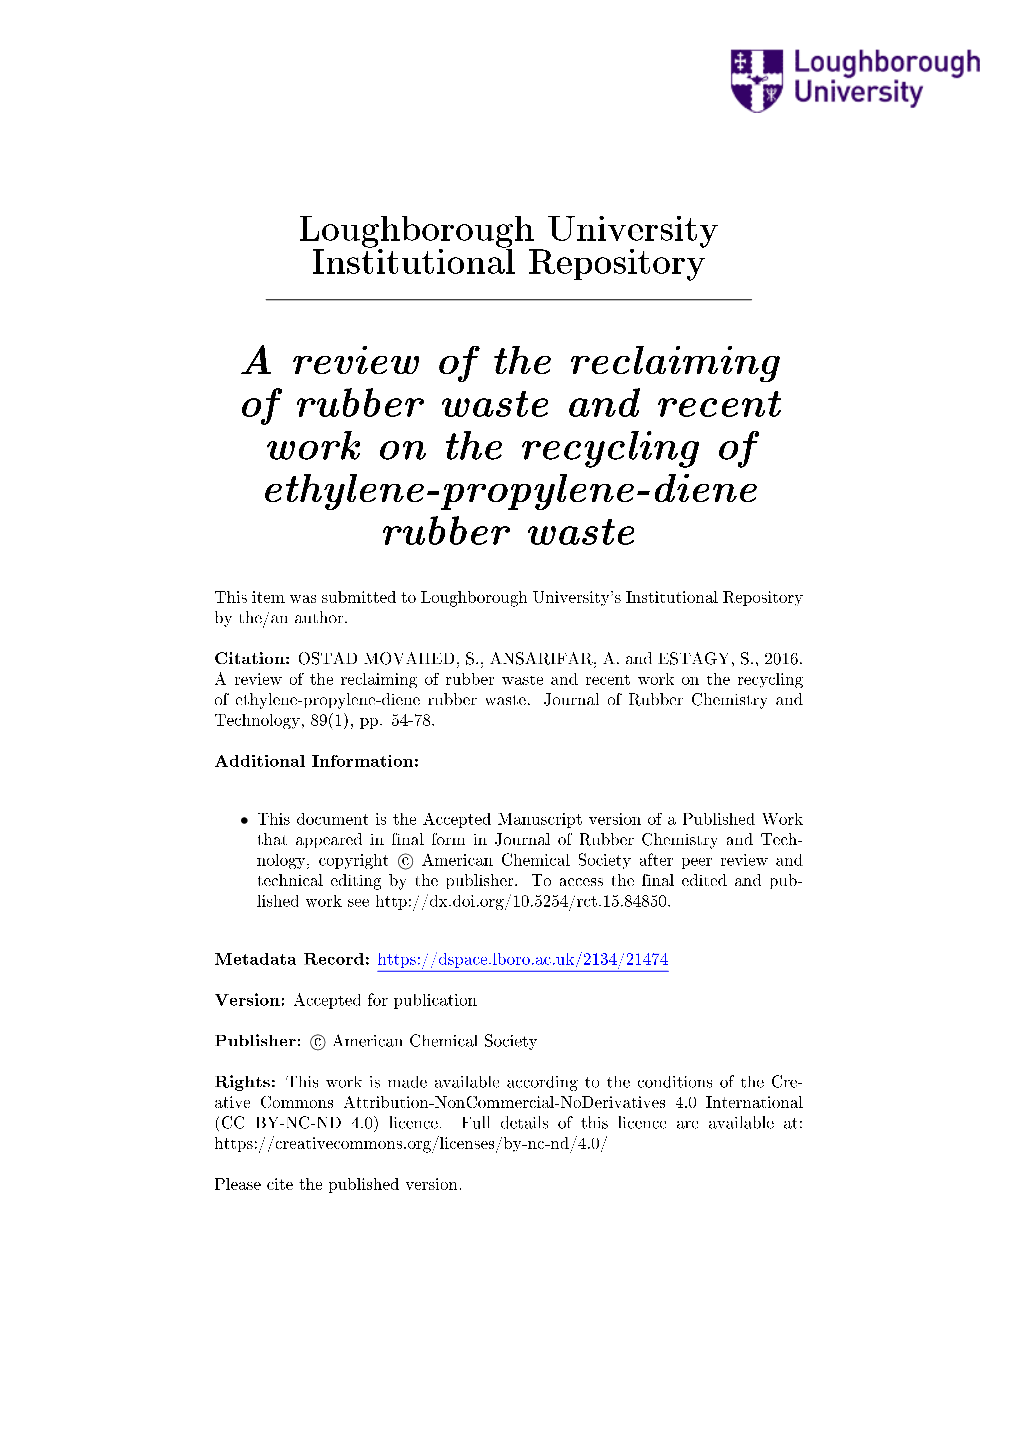 A Review of the Reclaiming of Rubber Waste and Recent Work on the Recycling of Ethylene-Propylene-Diene Rubber Waste